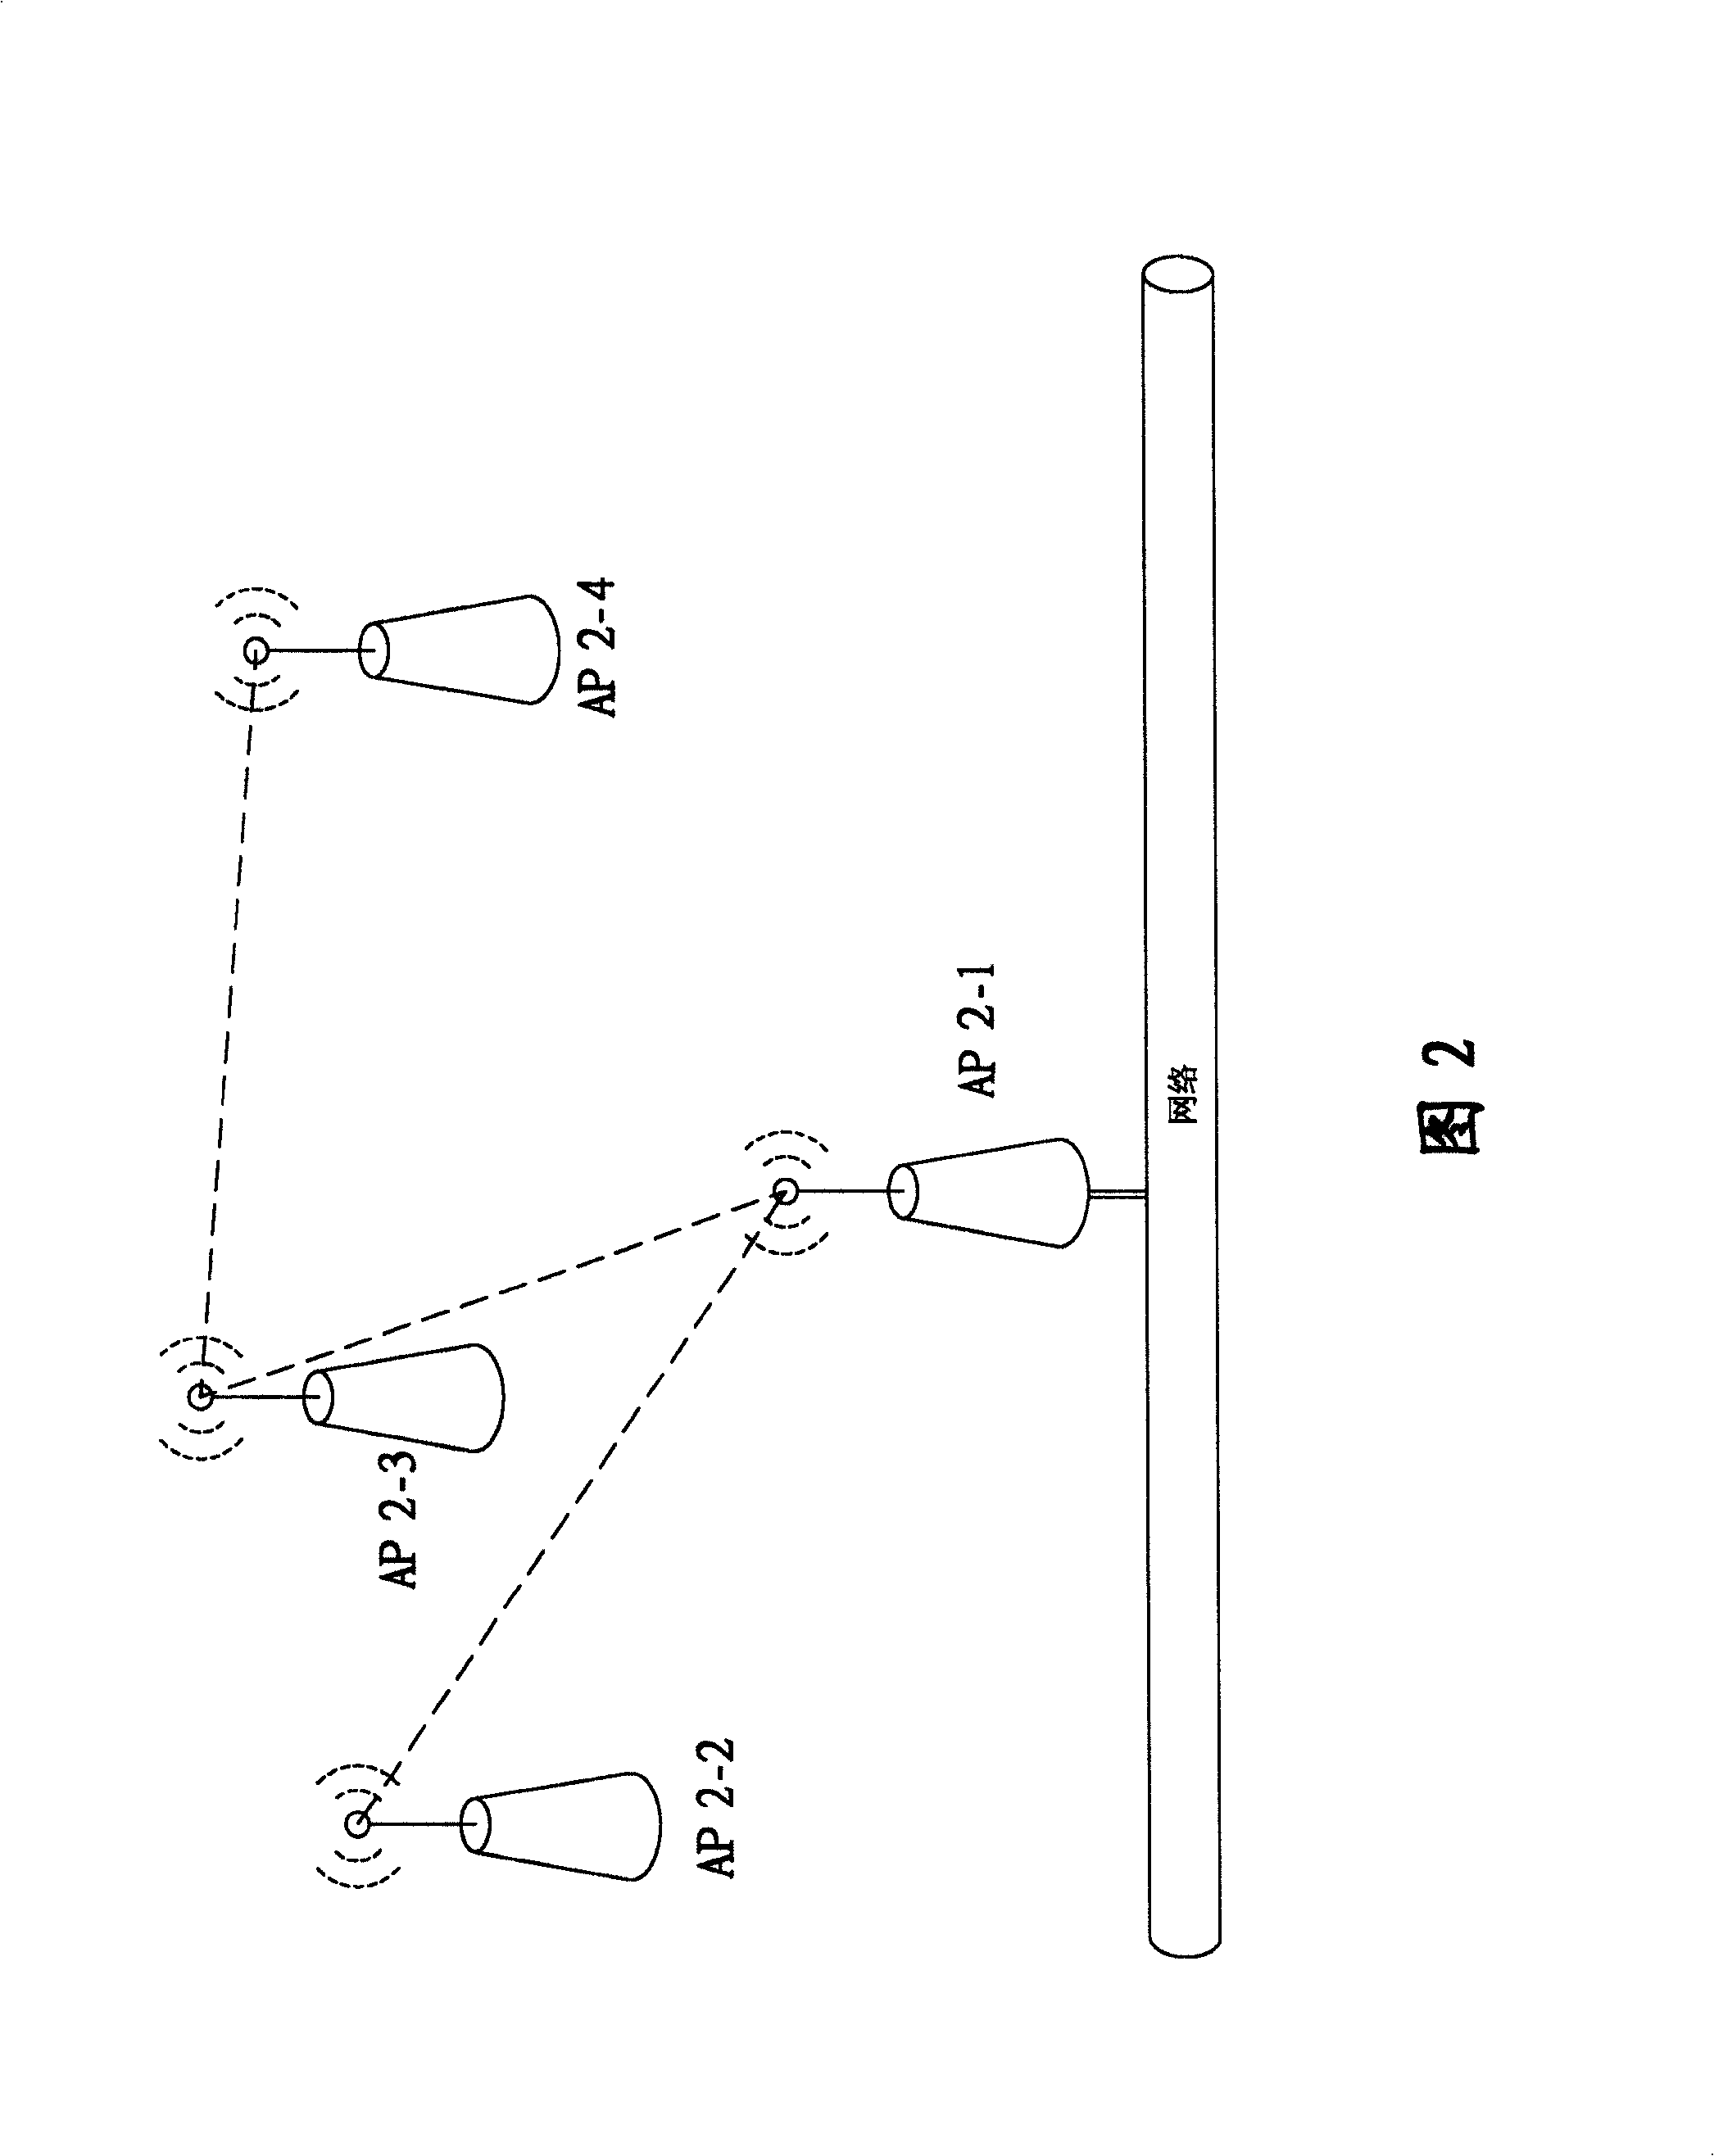 Dynamic wireless network topological system providing load balance and flux control pipe